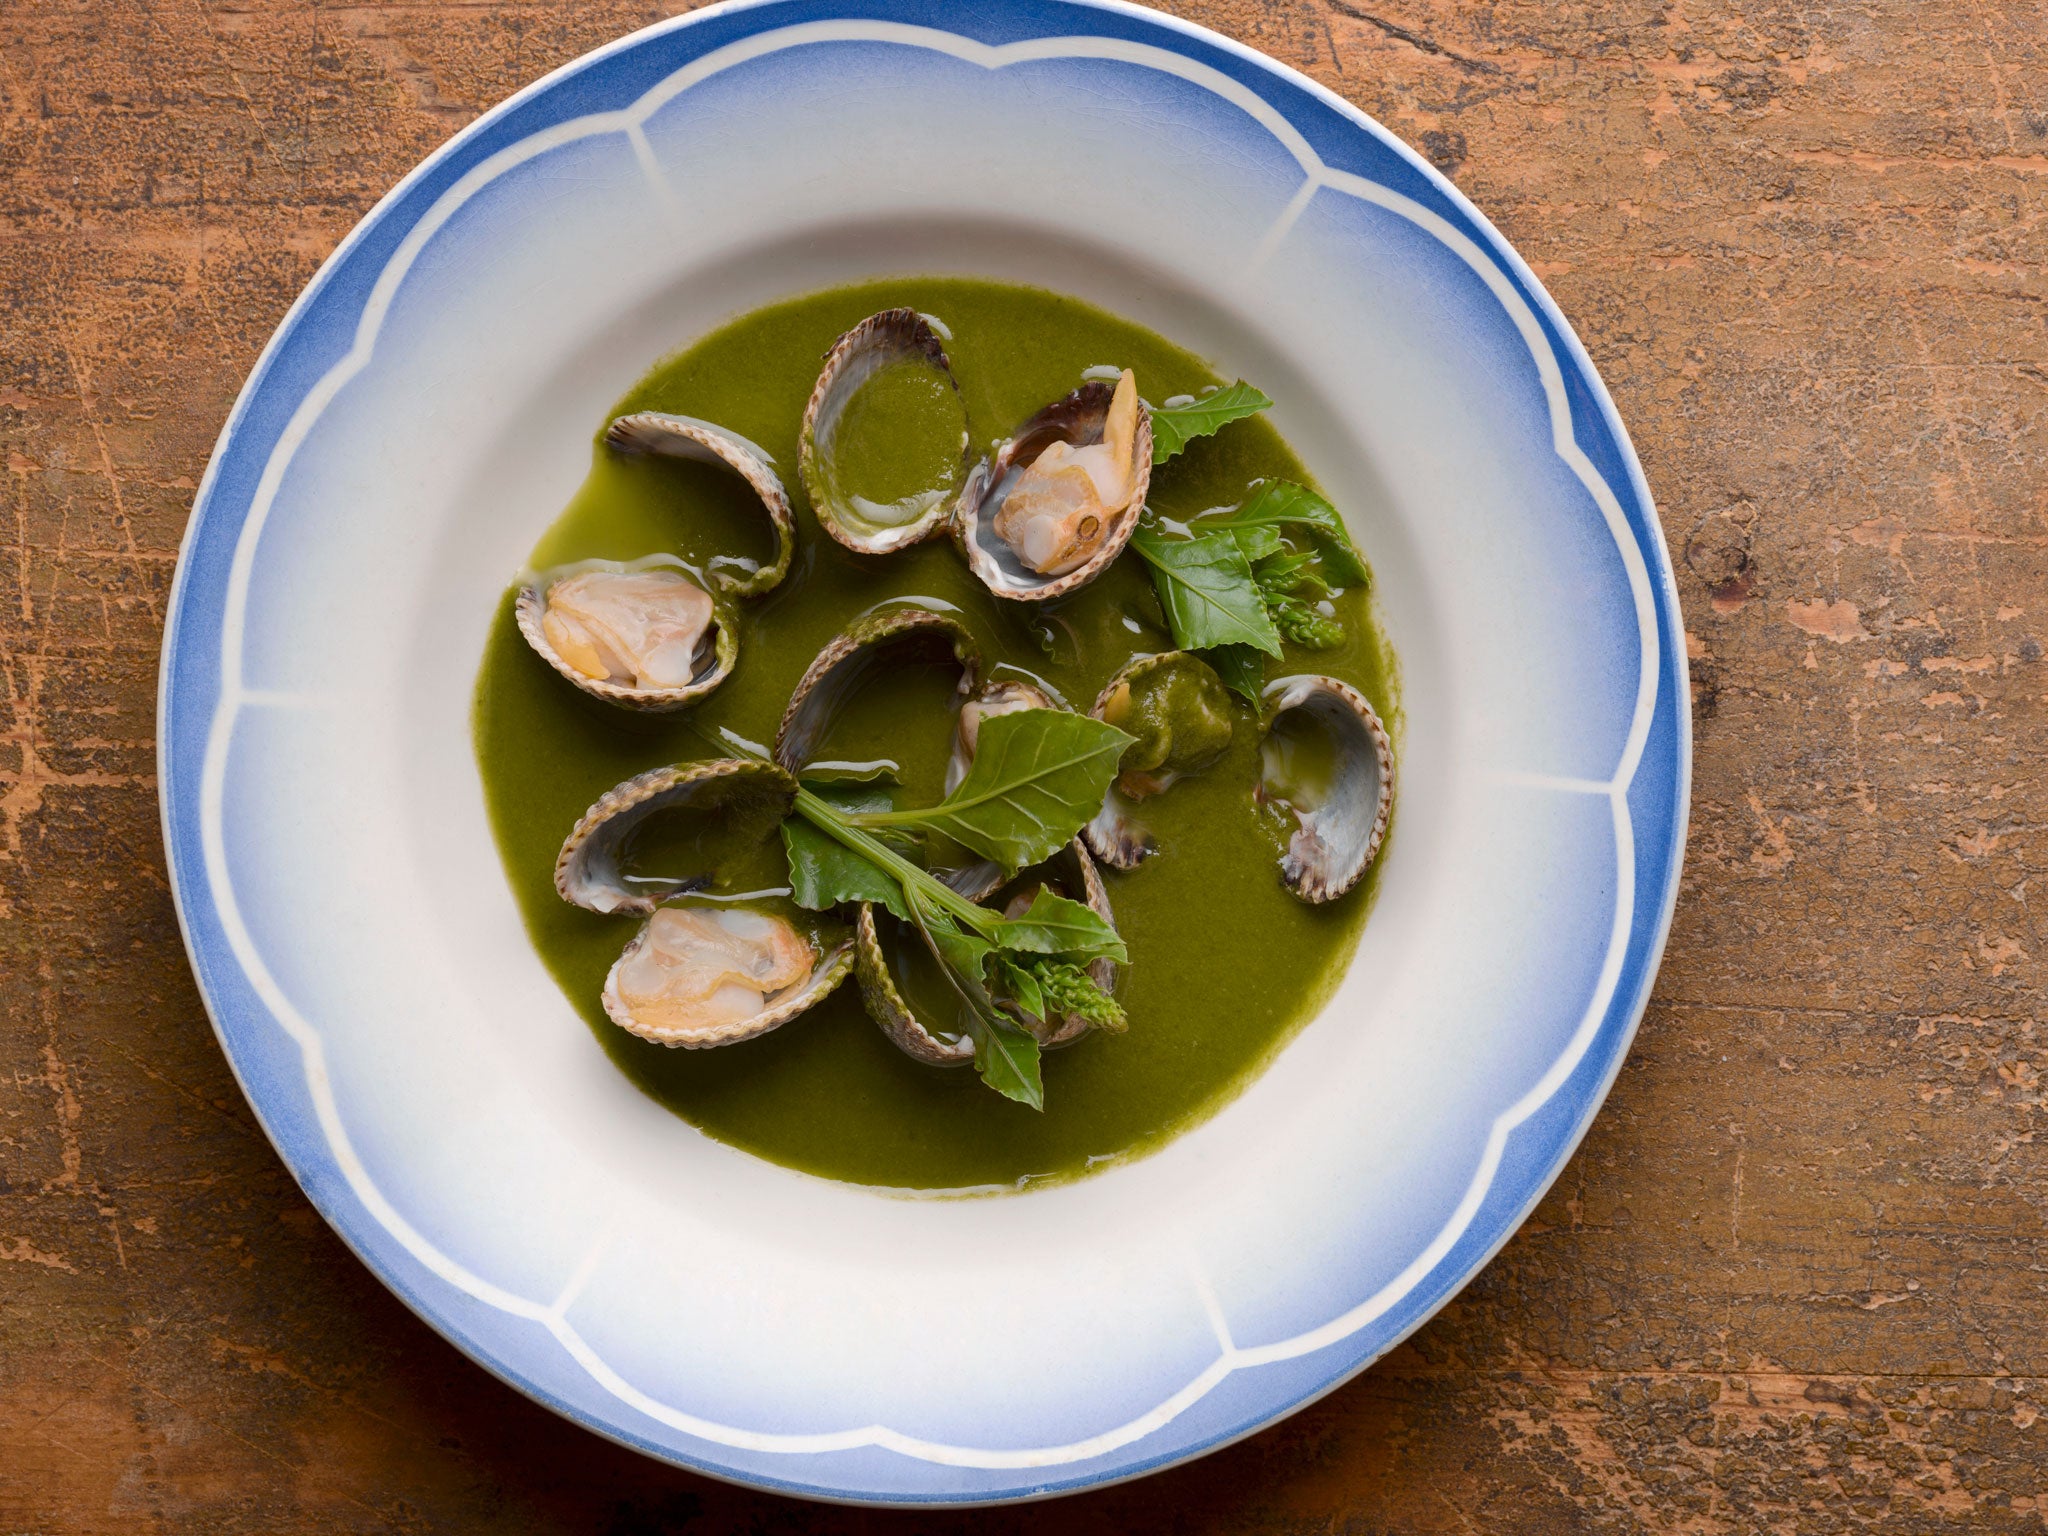 Amazing flavour: Sea beet and cockle broth